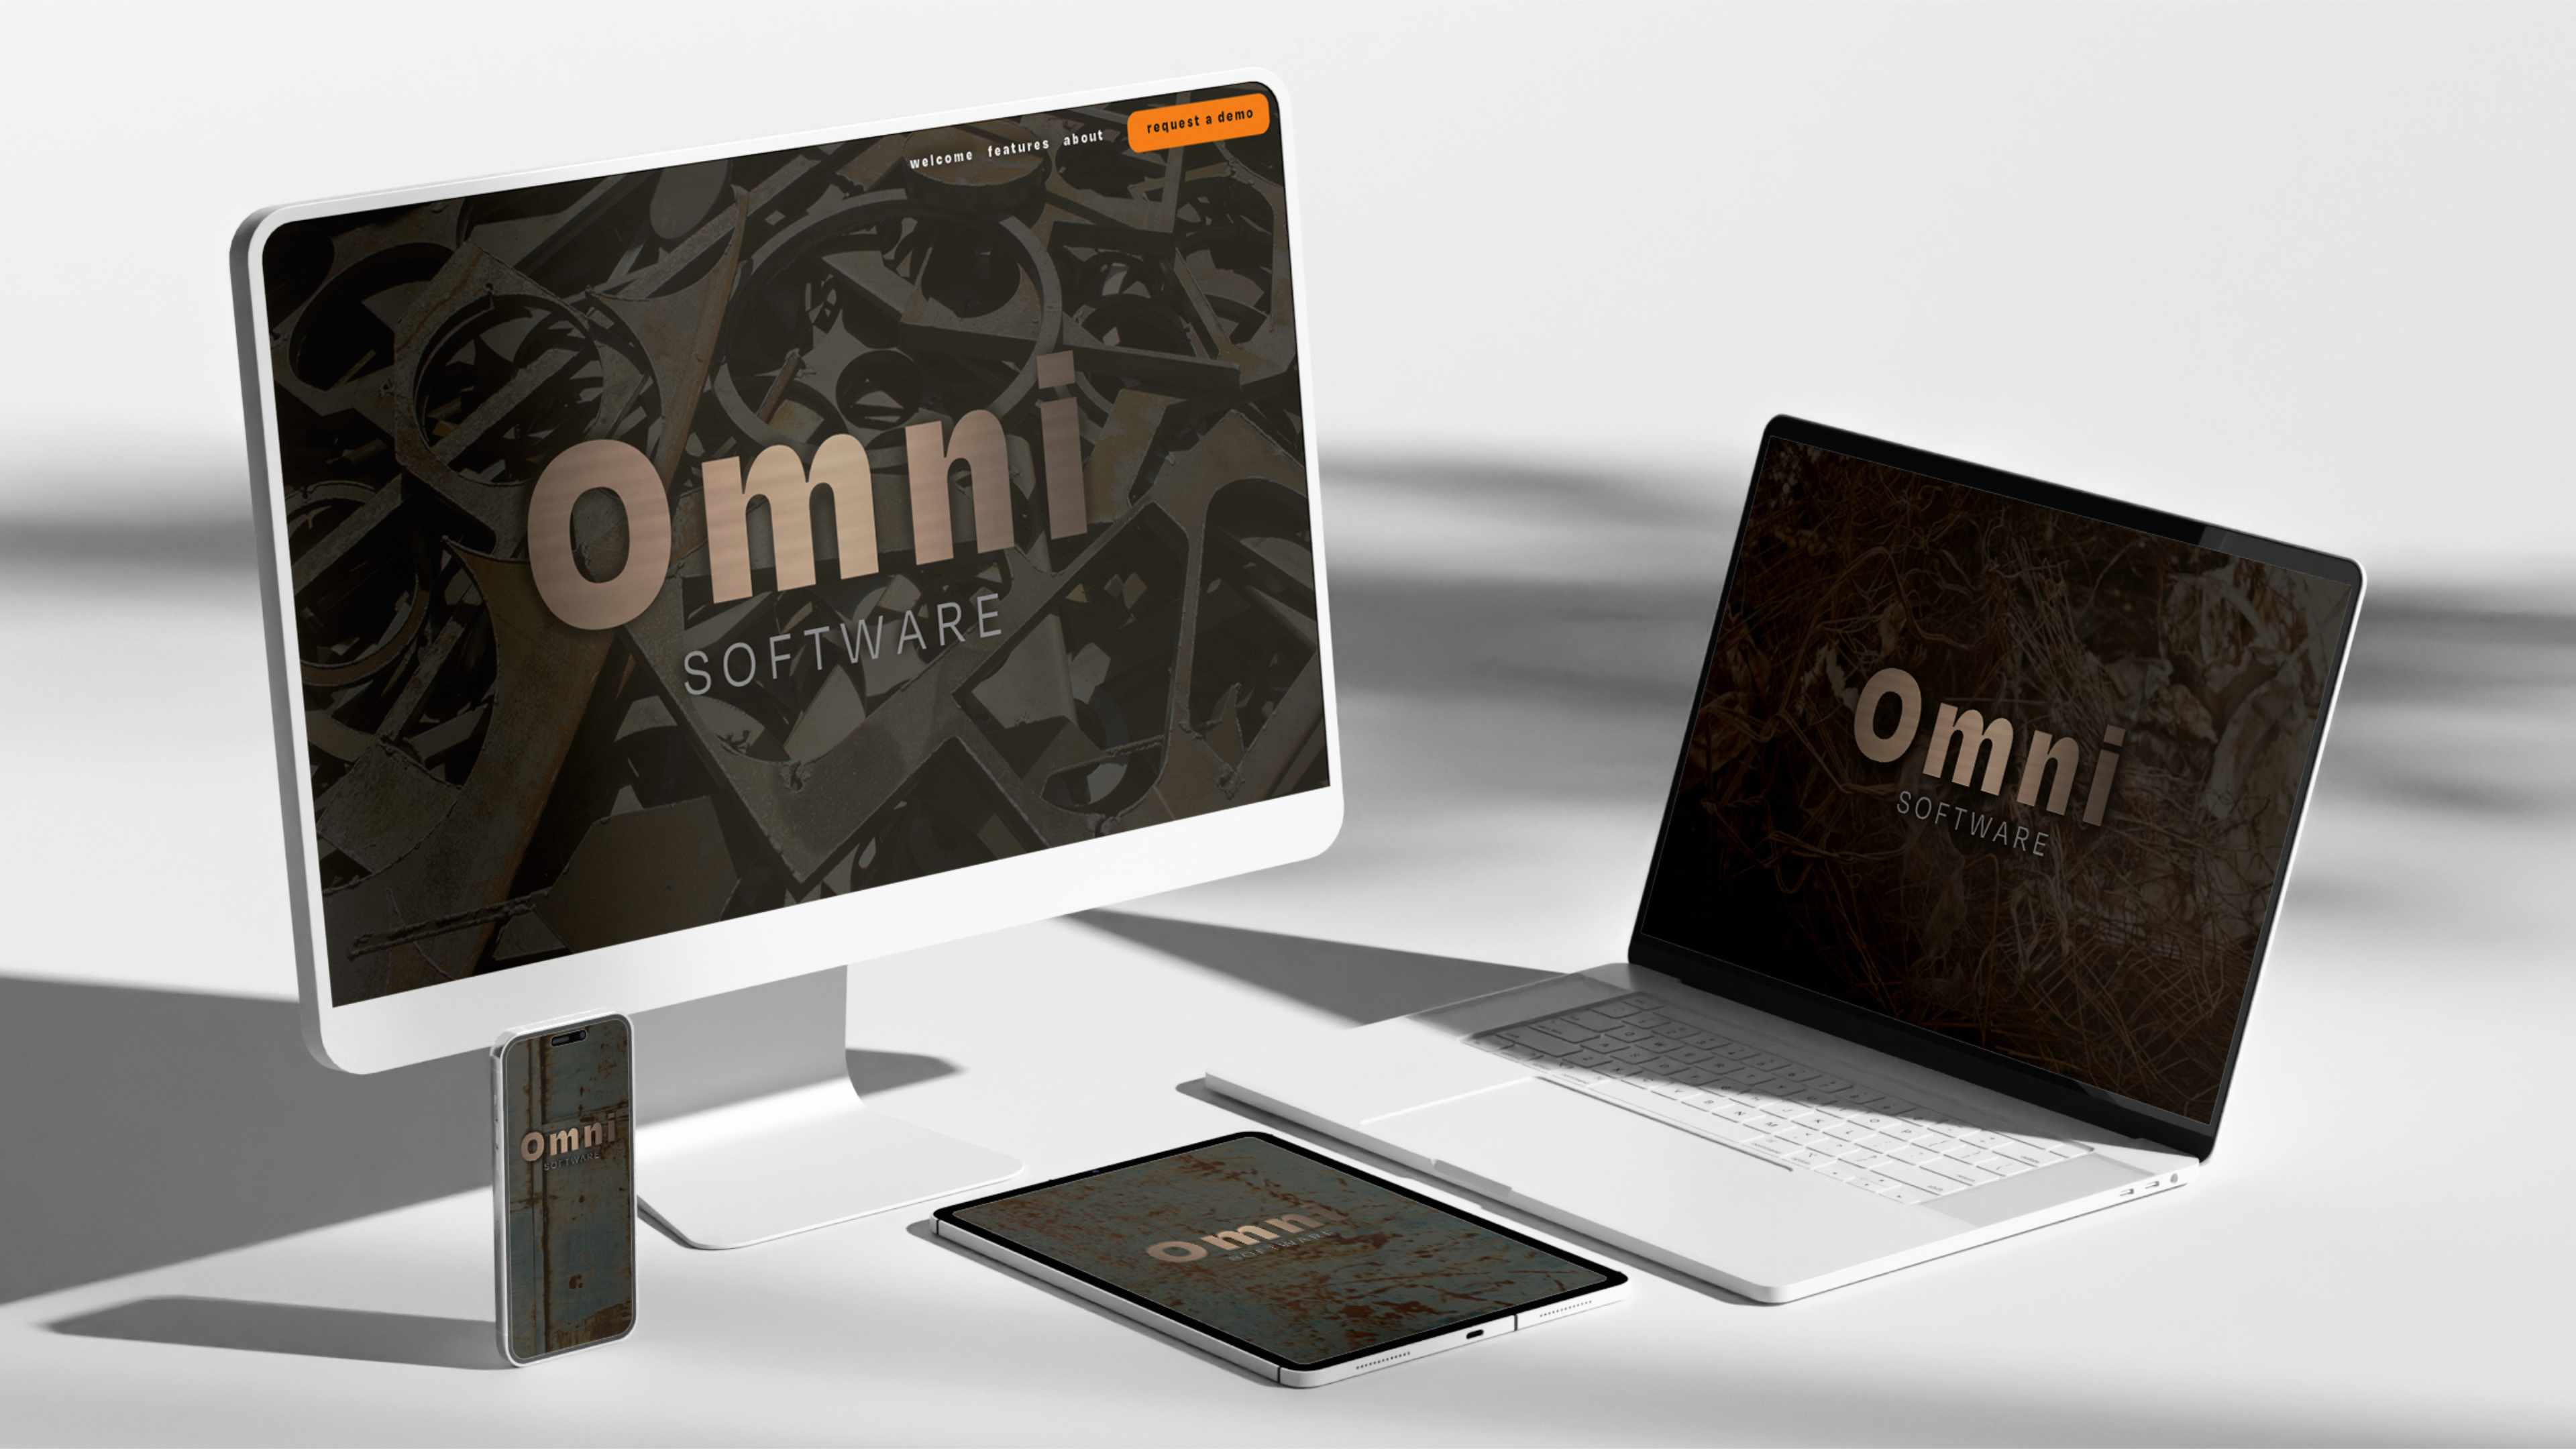 A collection of mockup devices with the Omni Software branding displayed